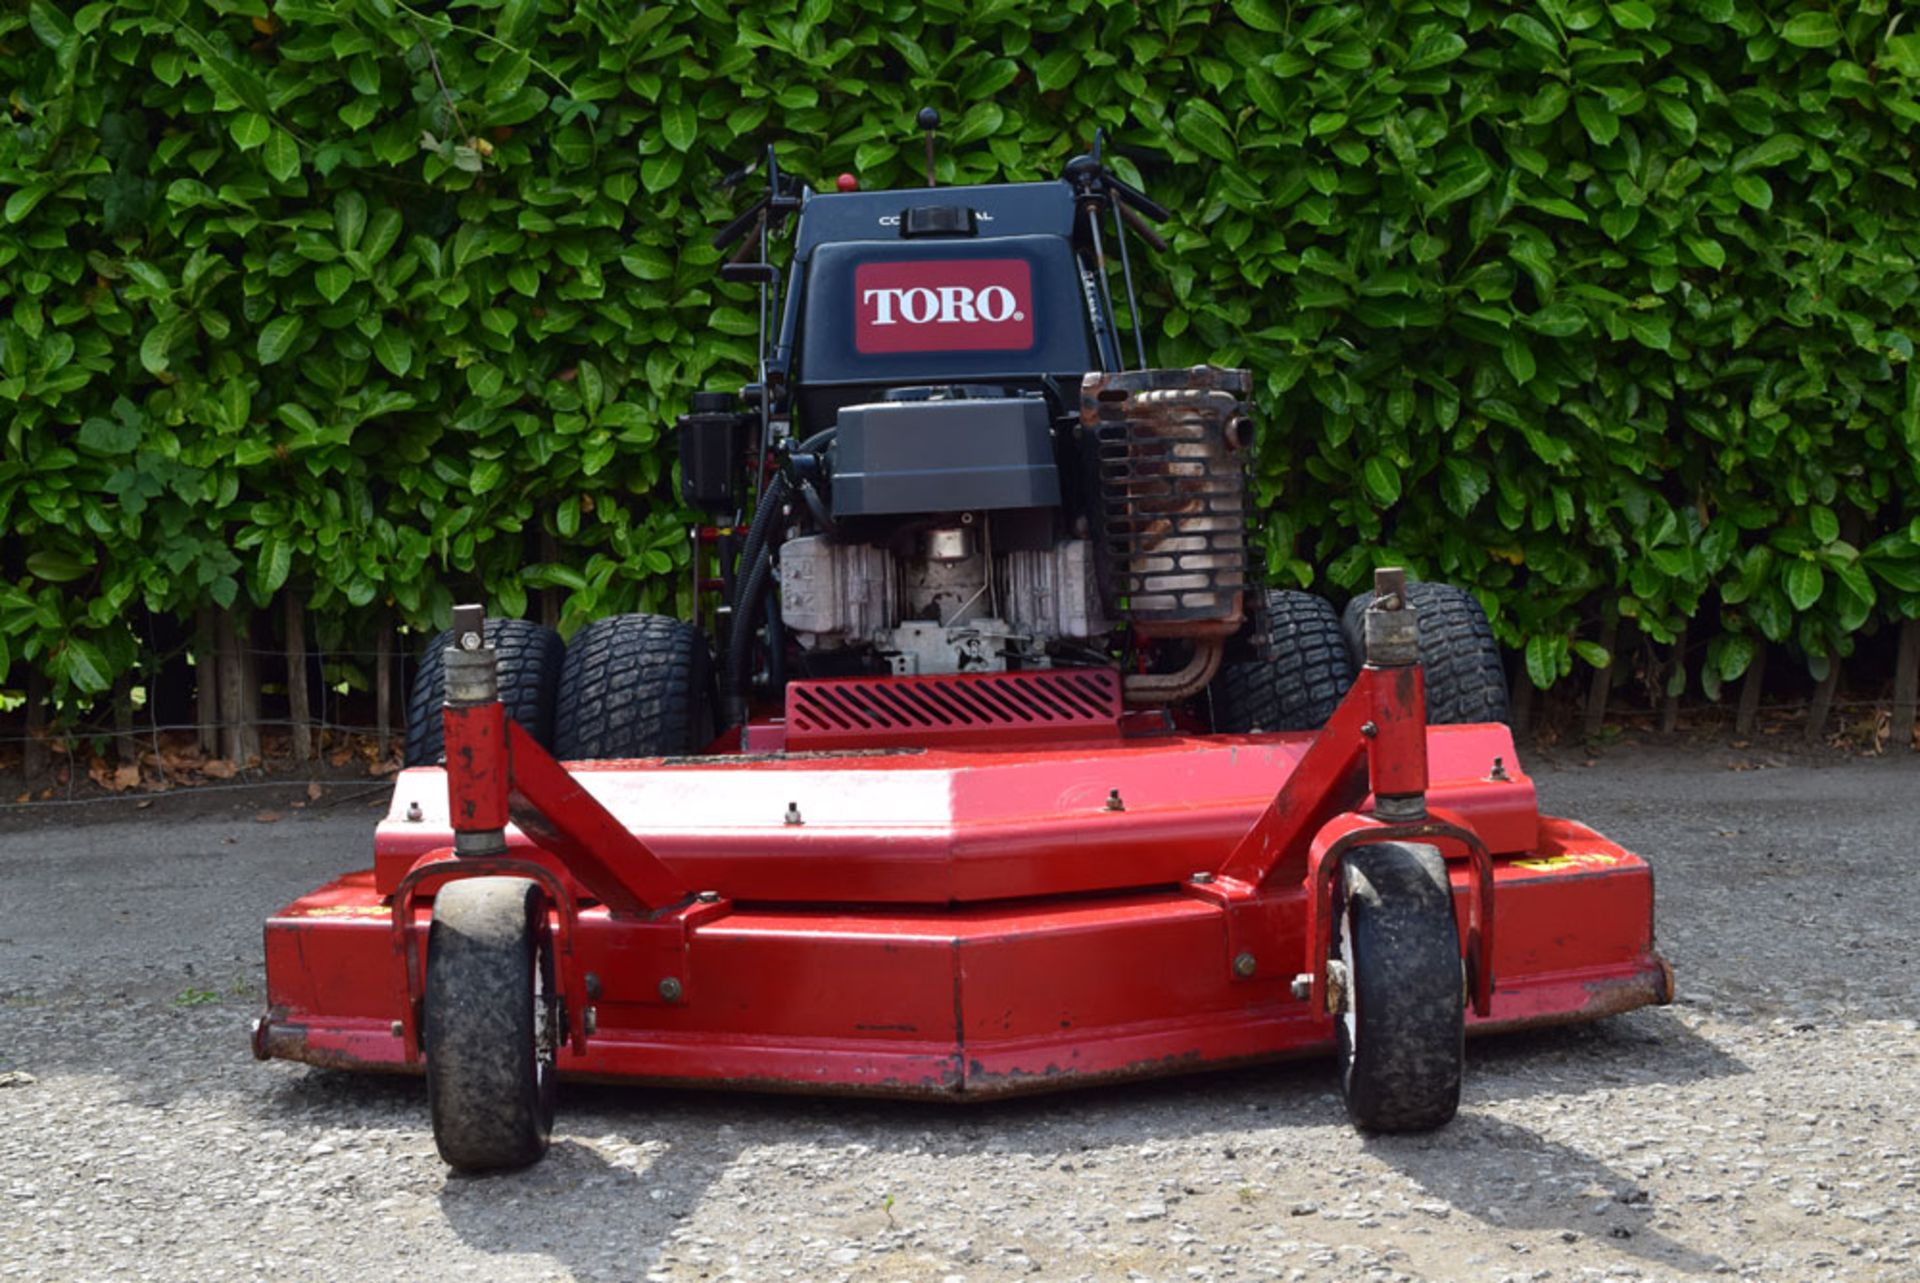 2009 Toro Commercial Pedestrian 48" Commercial Walk Behind Zero Turn Rotary Mower - Image 2 of 7